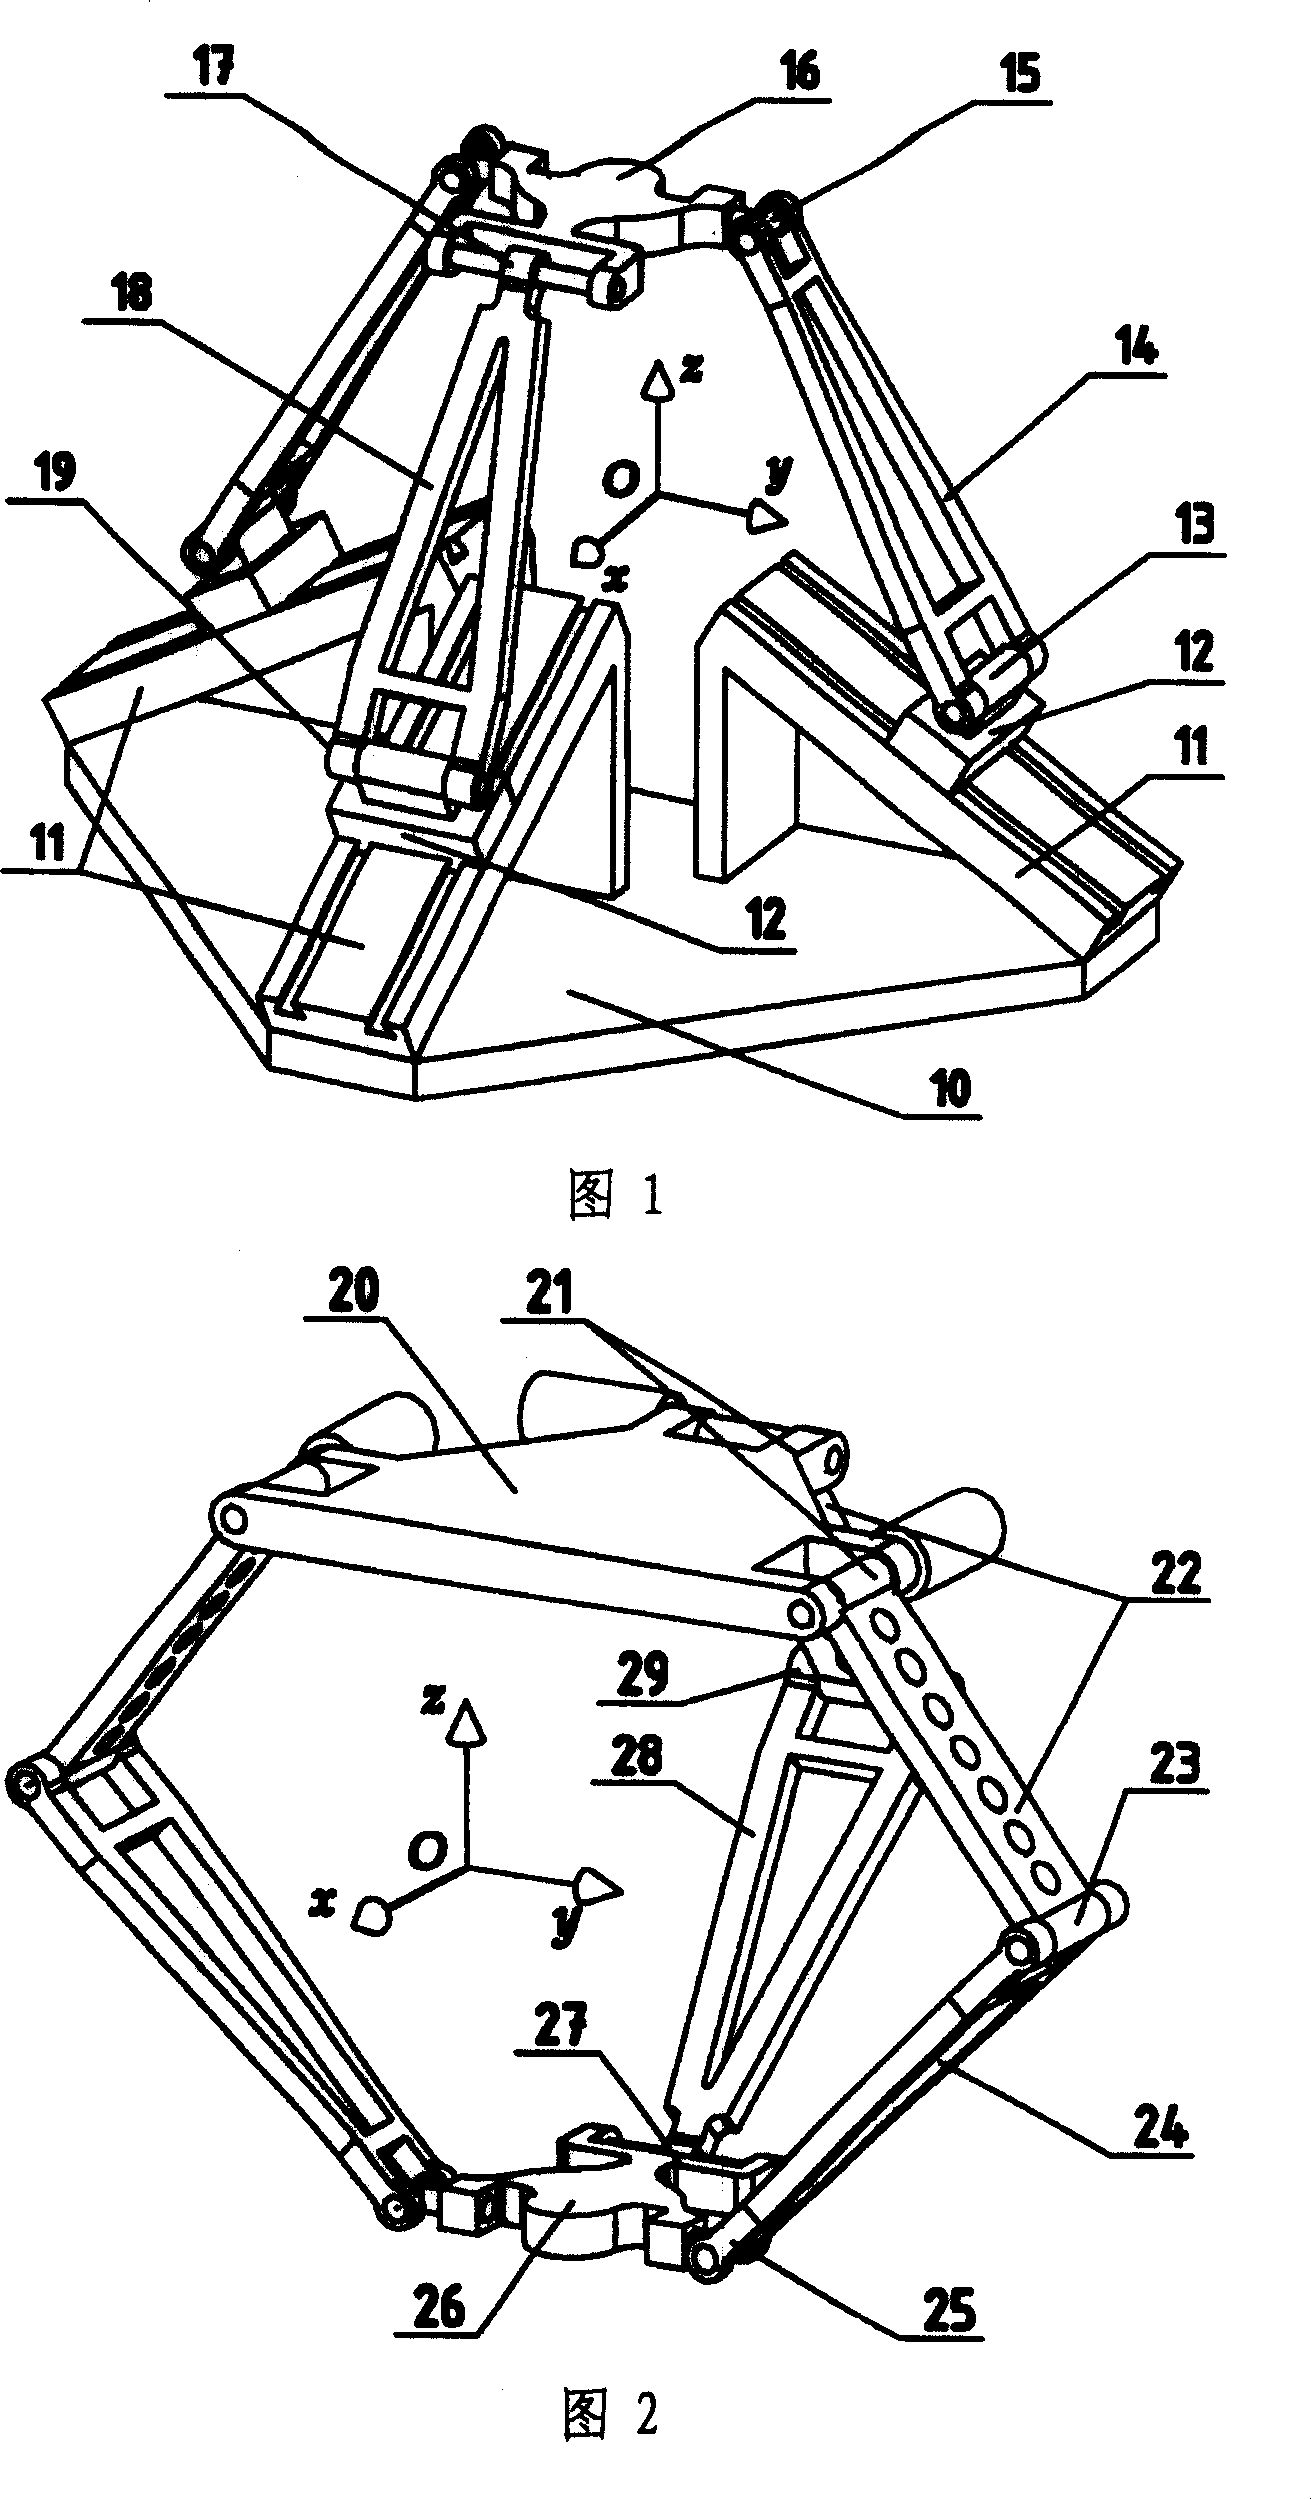 Moving-decoupling space three-freedom connection-in-parallel mechanism